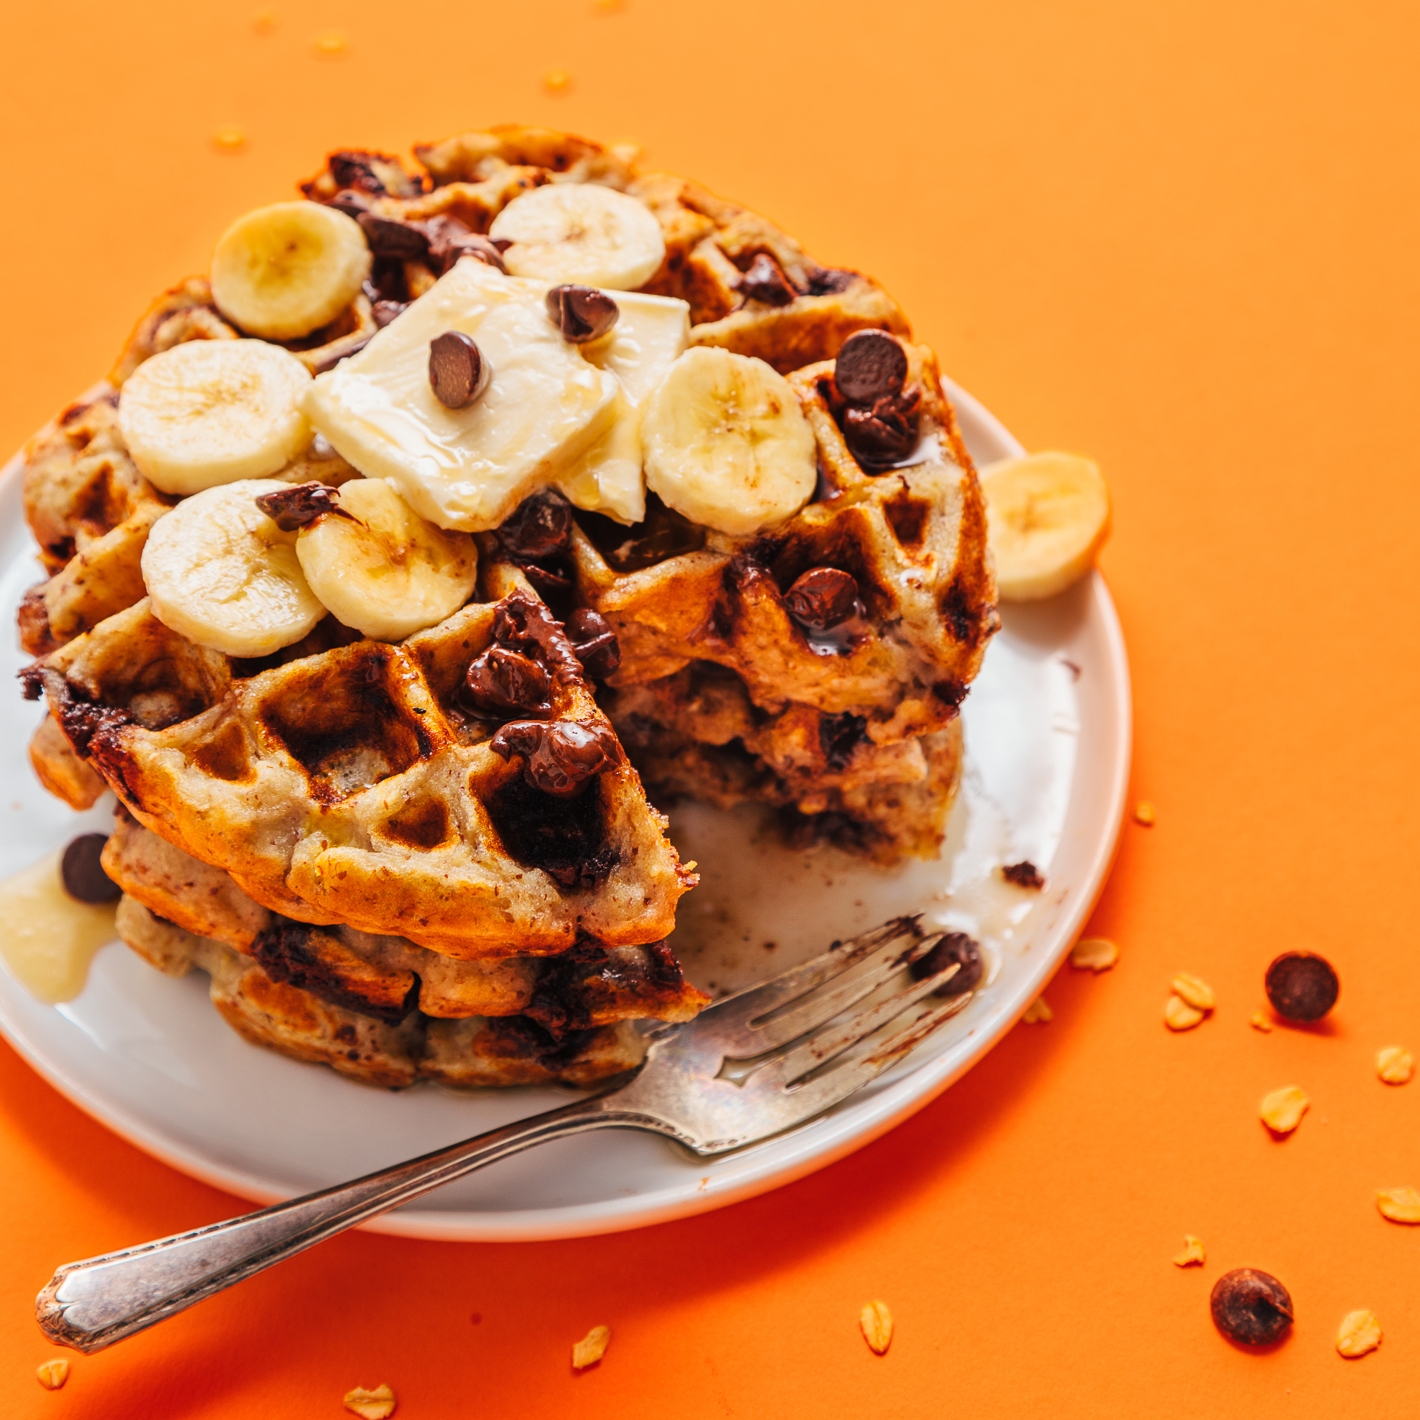 Chocolate Chip Banana Bread Waffles topped with sliced bananas and chocolate chips